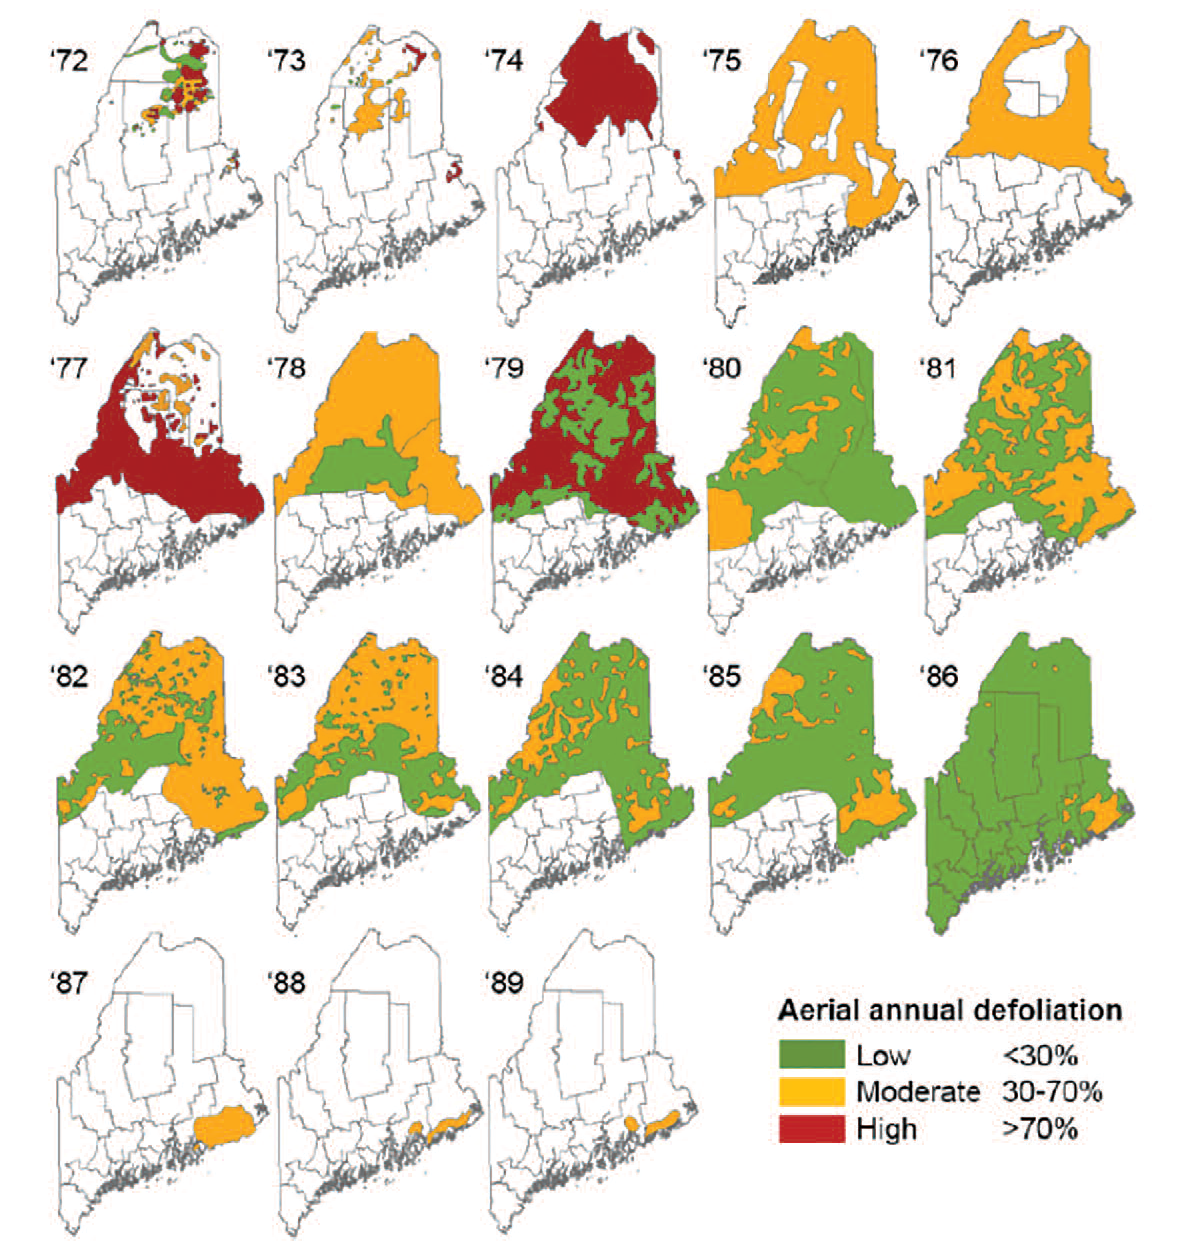 Compilation of SBW defoliation maps from the Maine Forest Service from 1972 to 1989.